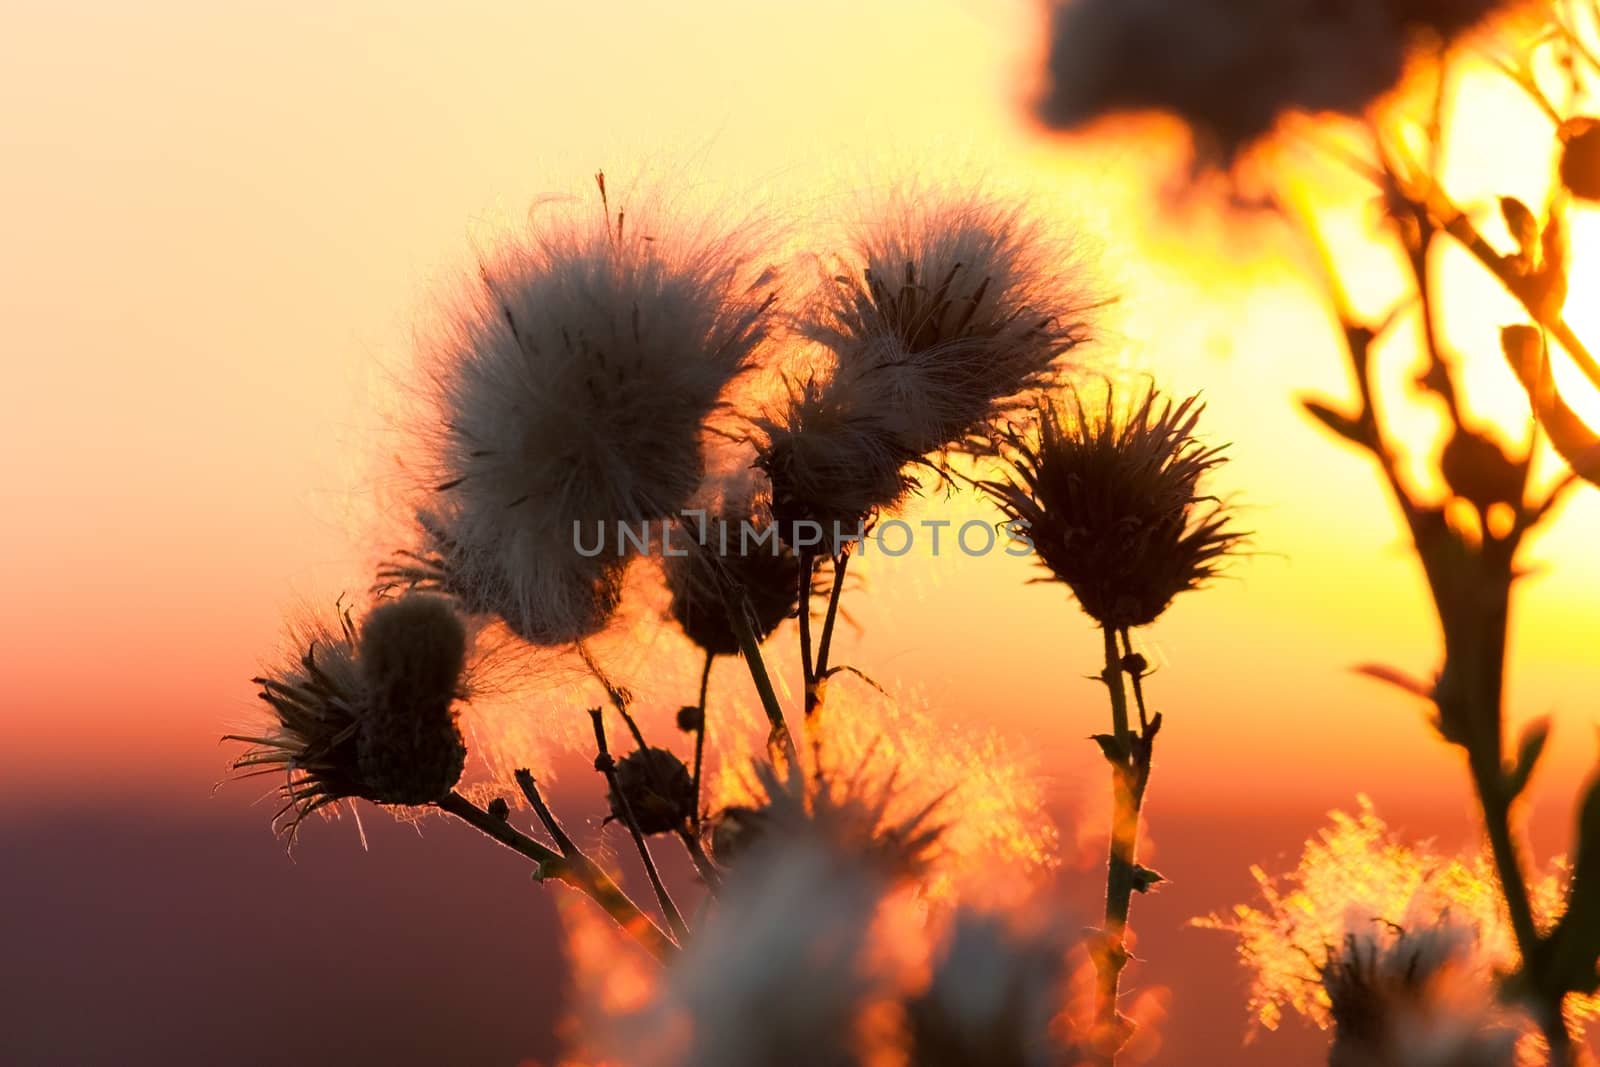 Cotton grass on a background of the sunset sky